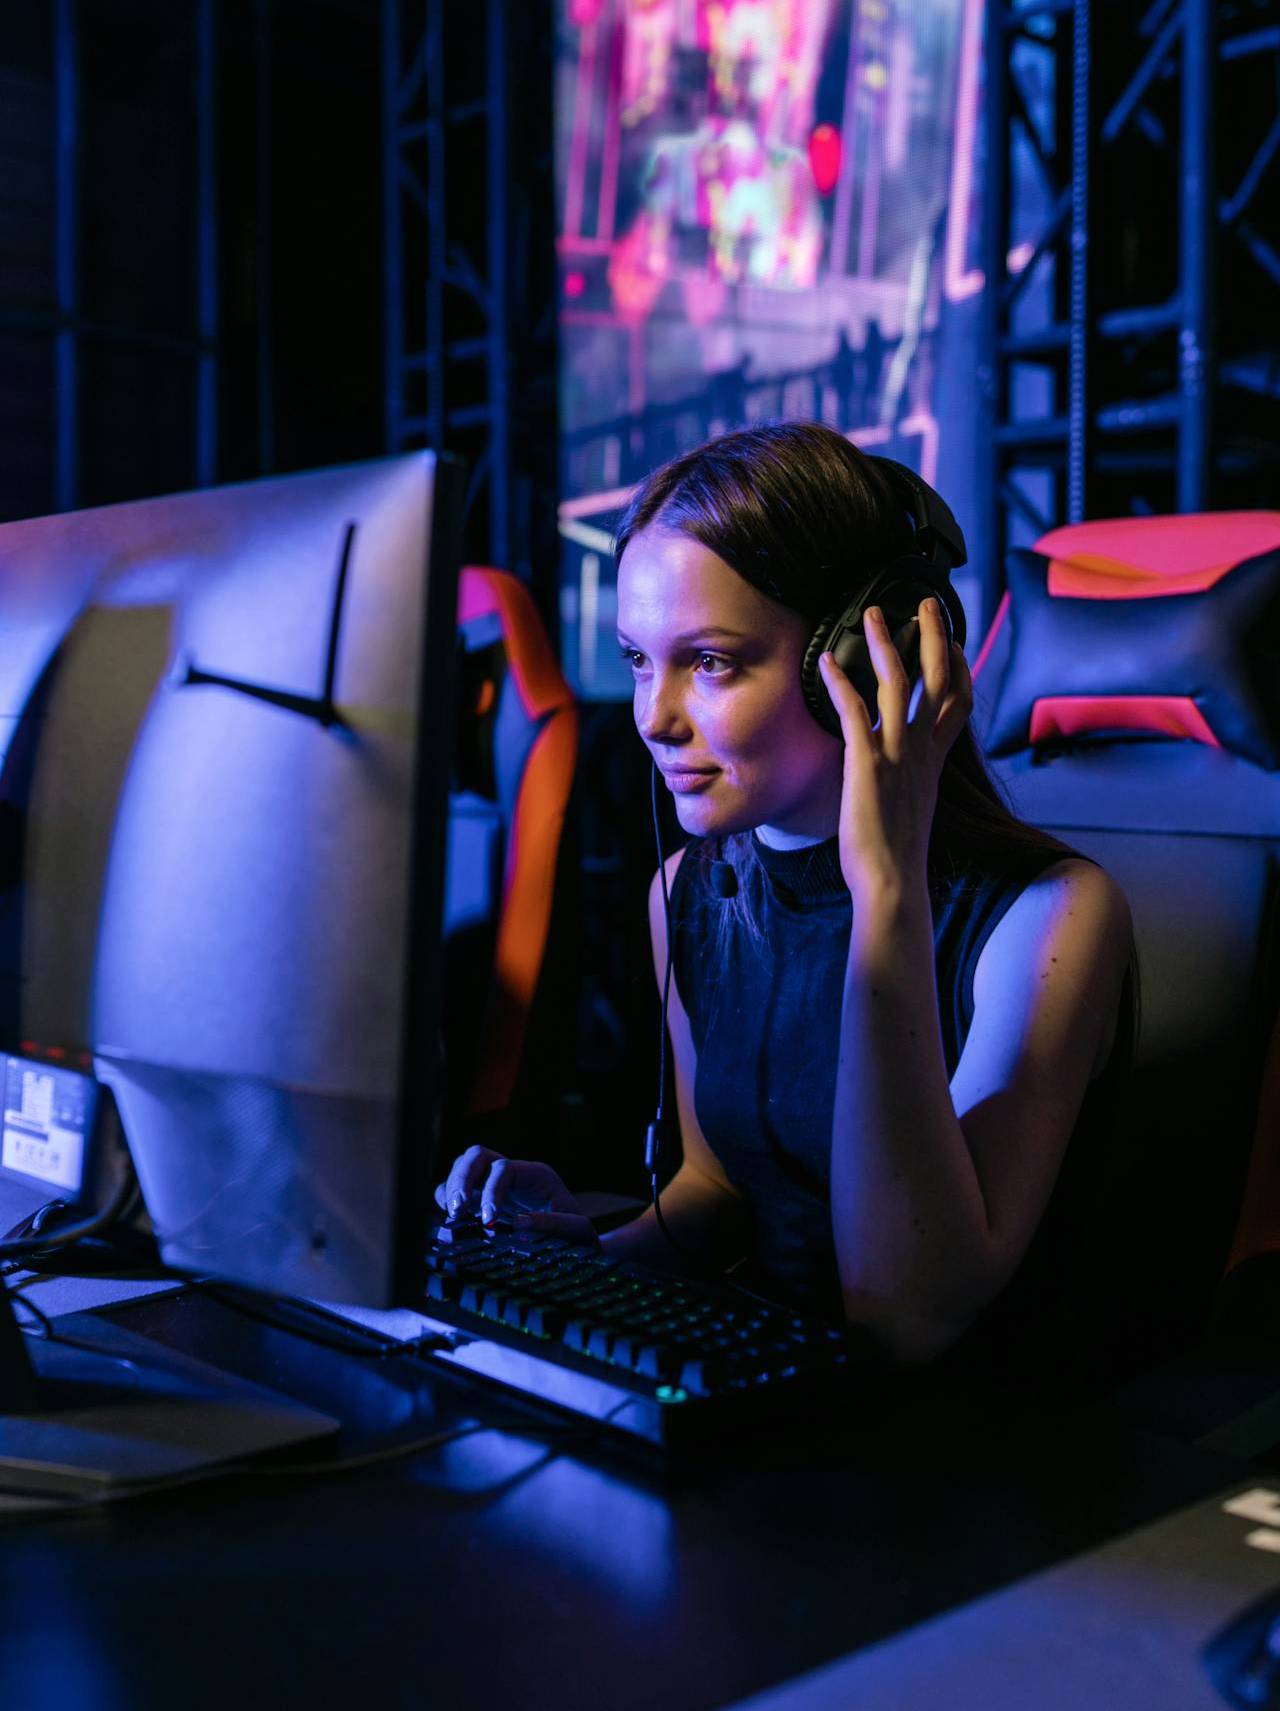 A woman with headphones is focused on her computer screen, using a video game emulator in a room with colorful lighting, indicative of a gaming or digital entertainment environment.